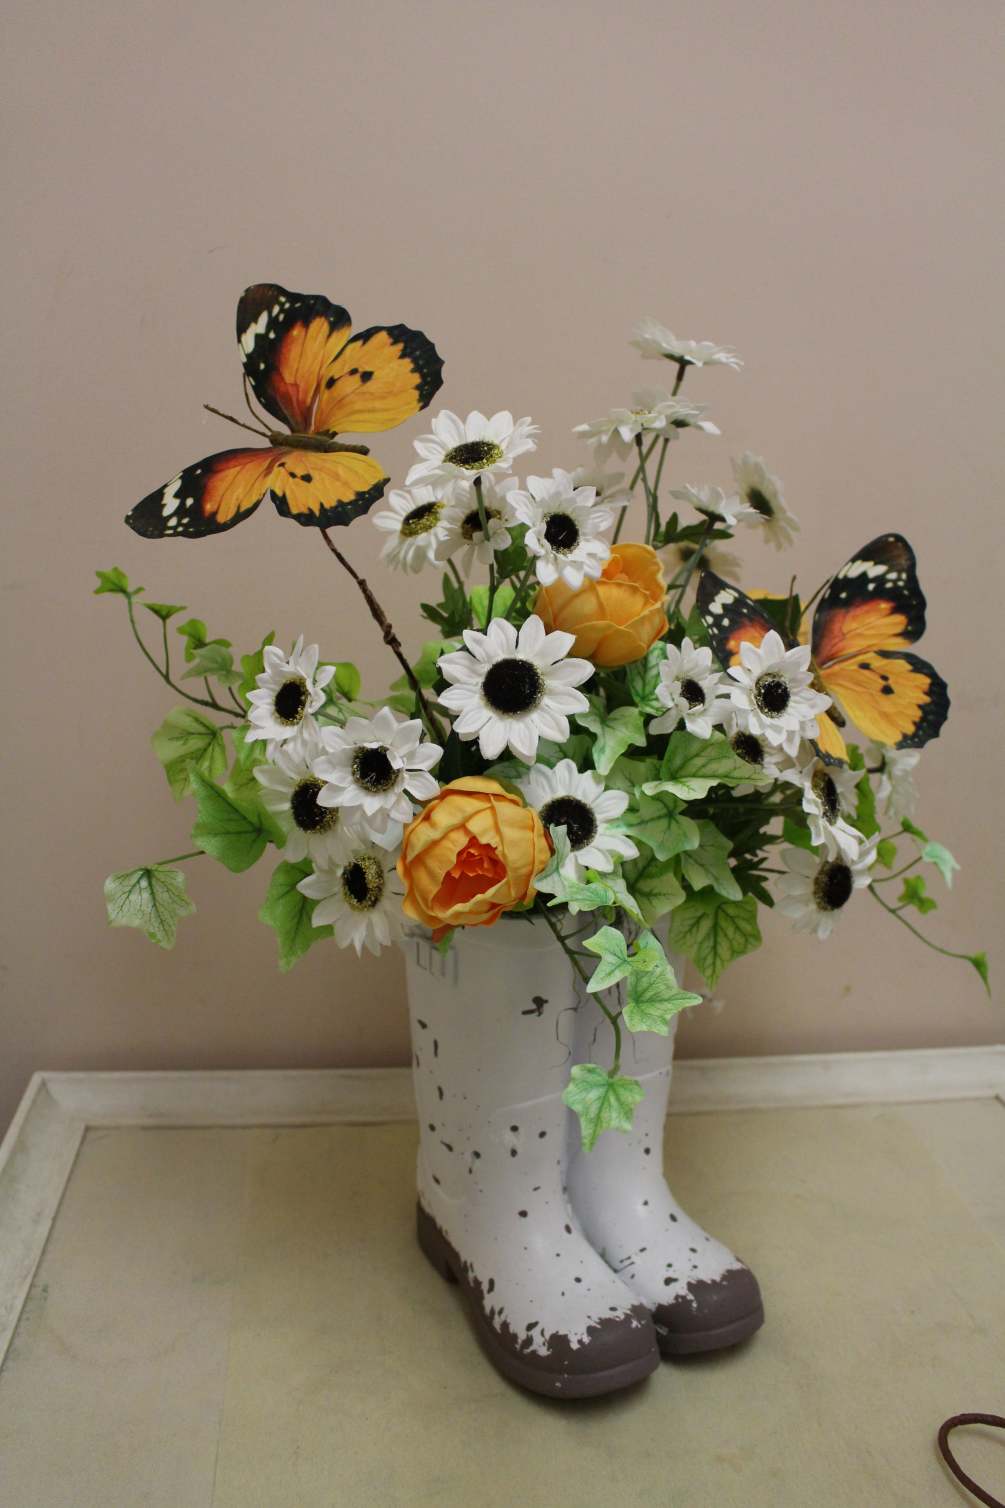 rainboots filled with permanent flowers 
great to take out year after year